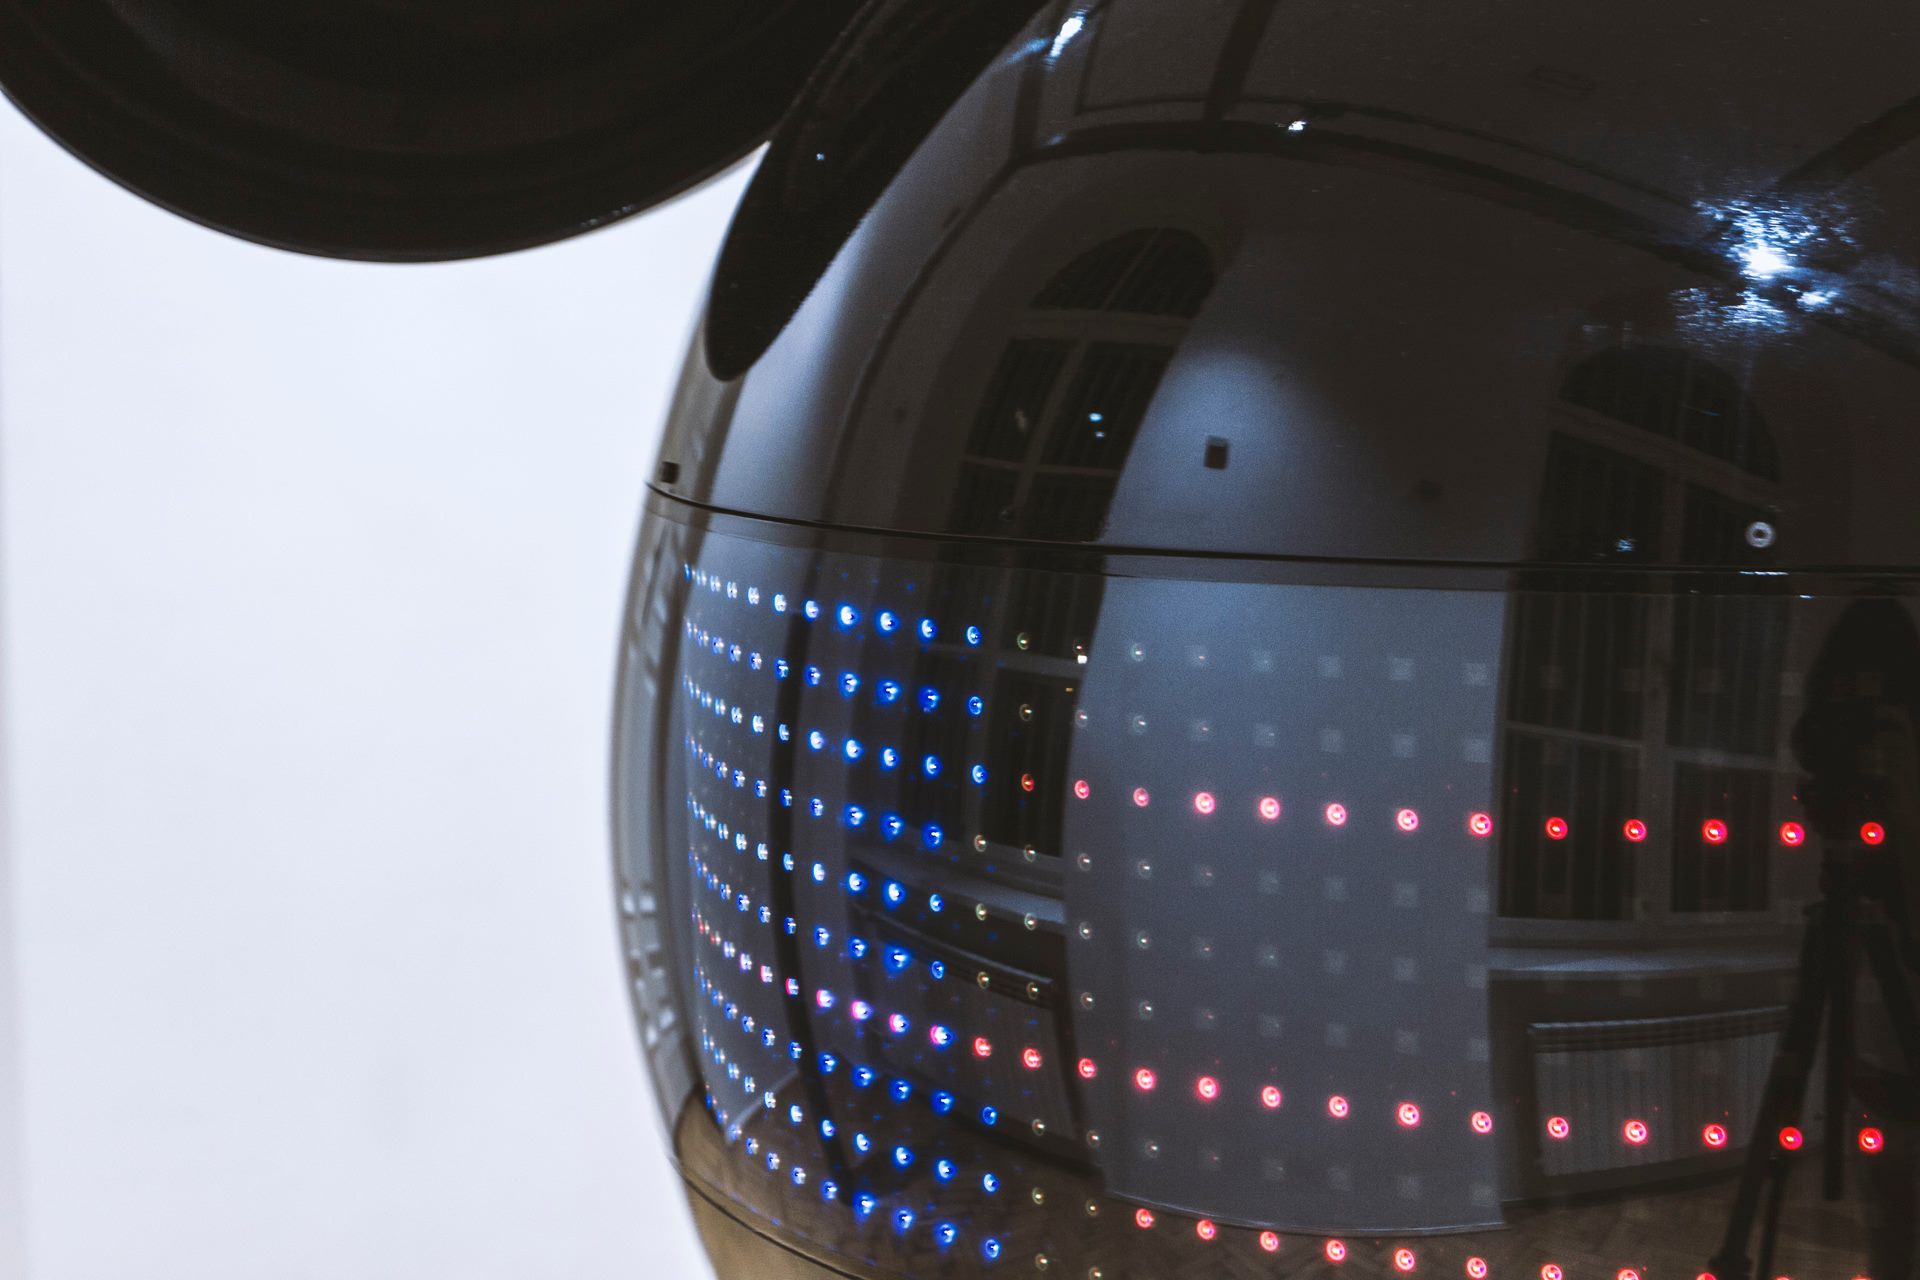 Ominous Mickey Mouse Robot Head Is A Music Visualiser